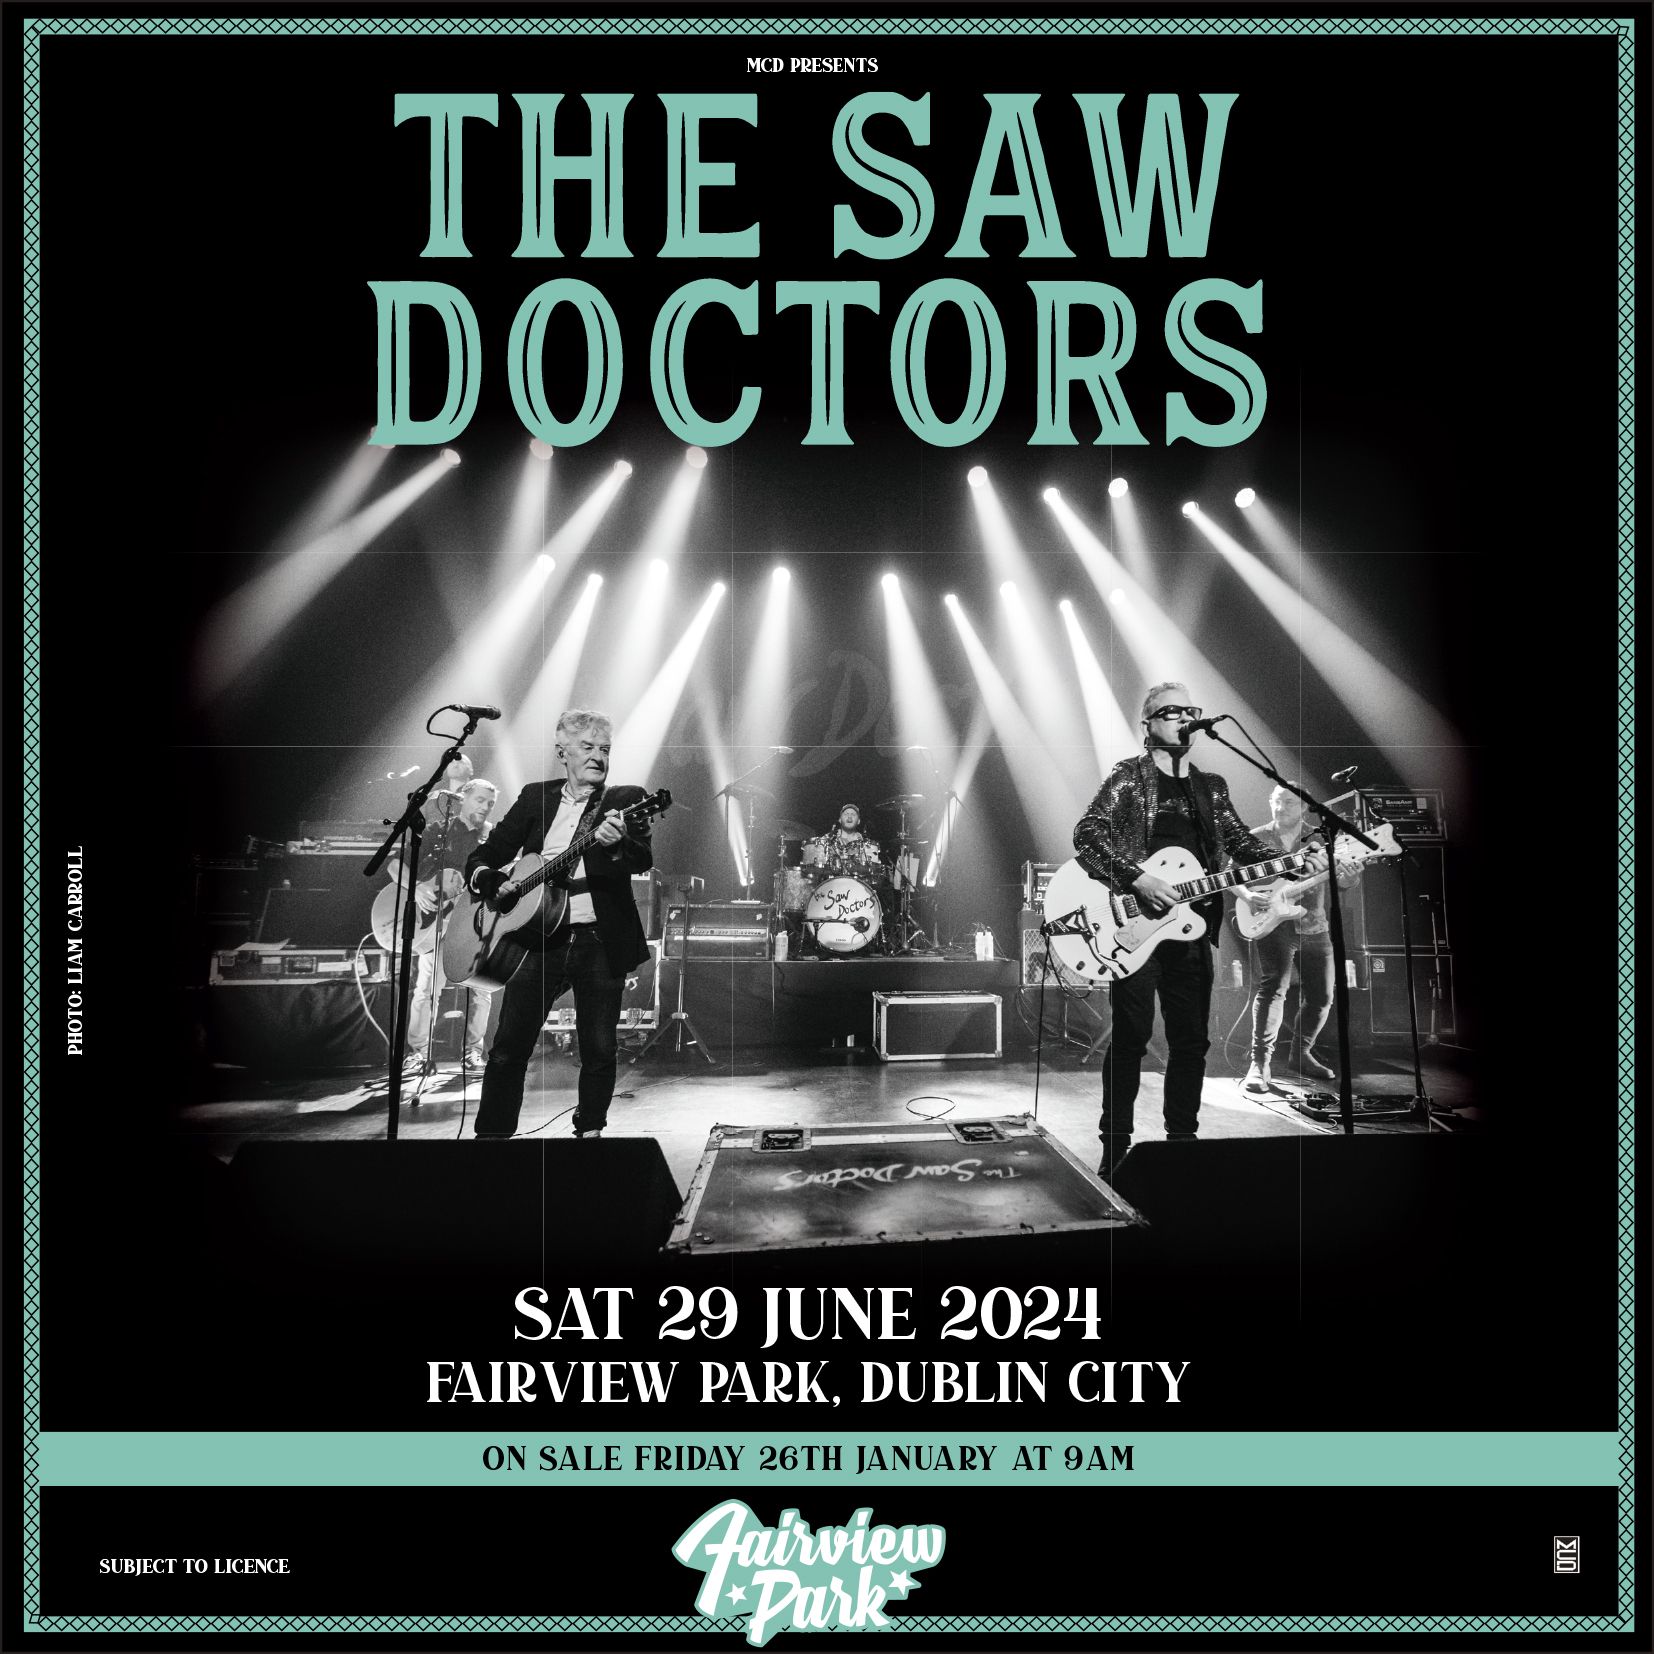 The Saw Doctors to play Fairview Park, Dublin
Saturday 29th June 2024 
Only Dublin Concert
Tickets on sale this Friday 26th January at 9.00am 
